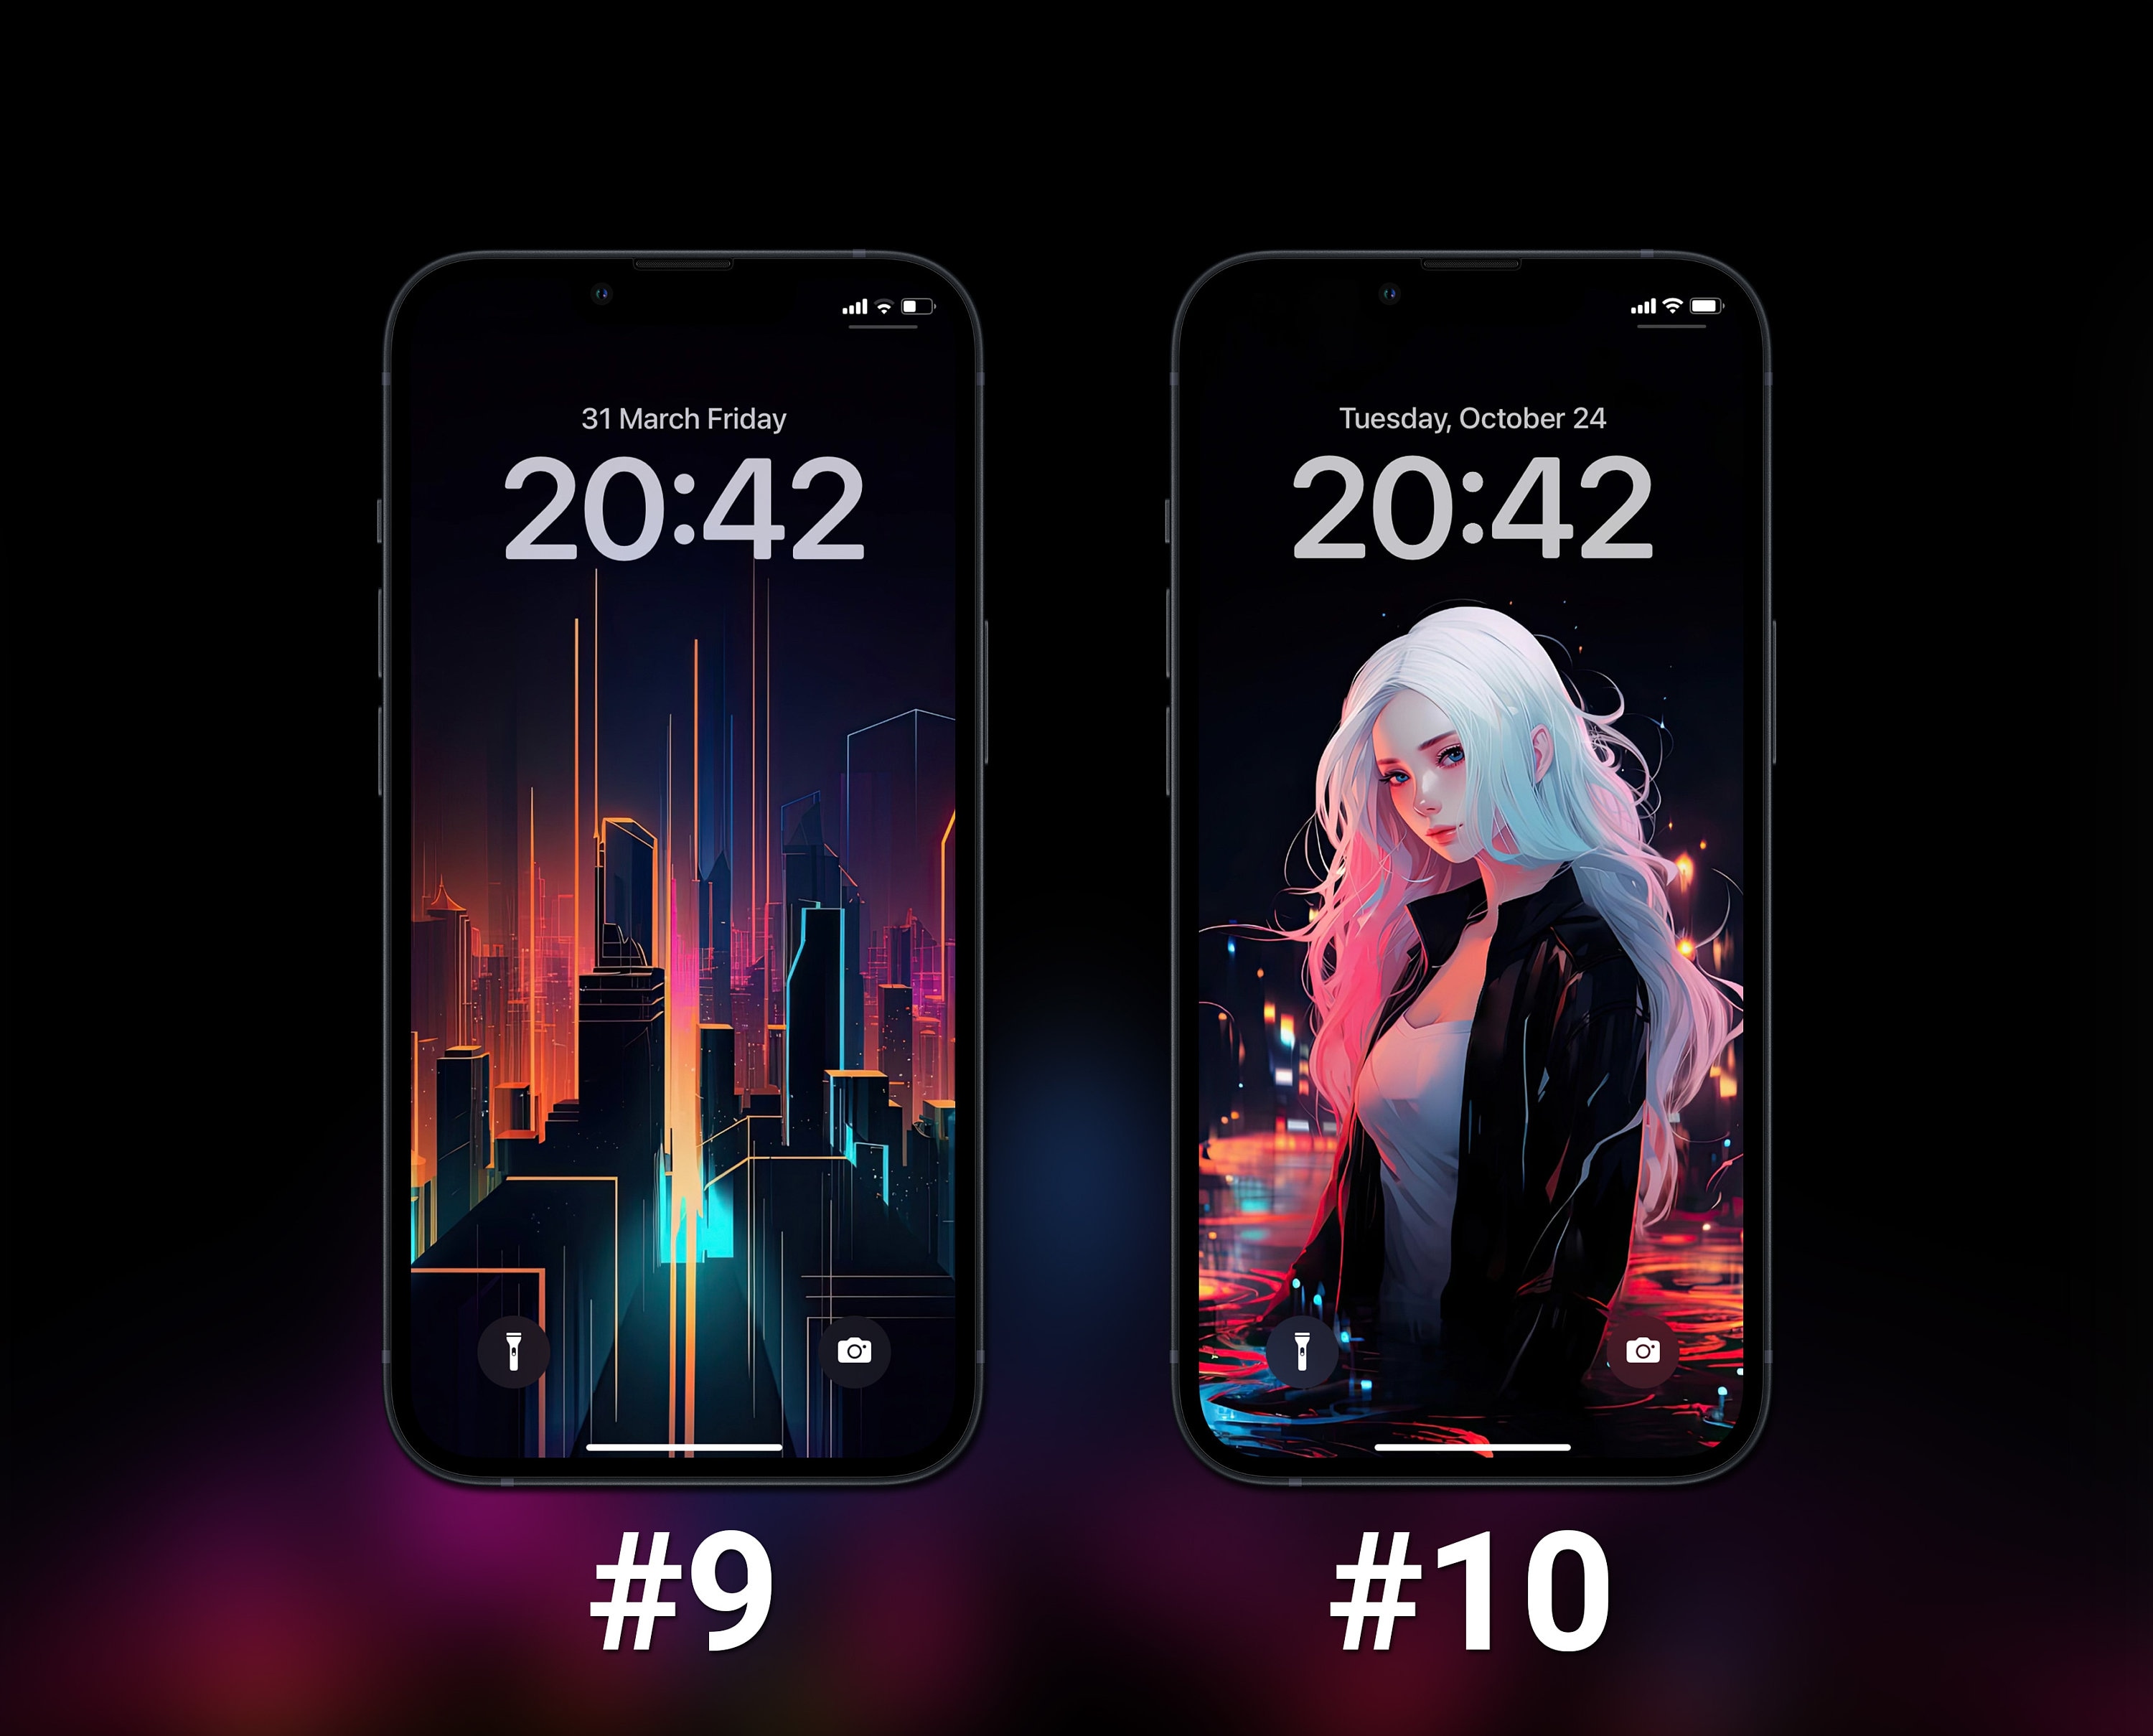 100+] Handpicked Cyberpunk Wallpapers for iOS or Android Device- Dr.Fone